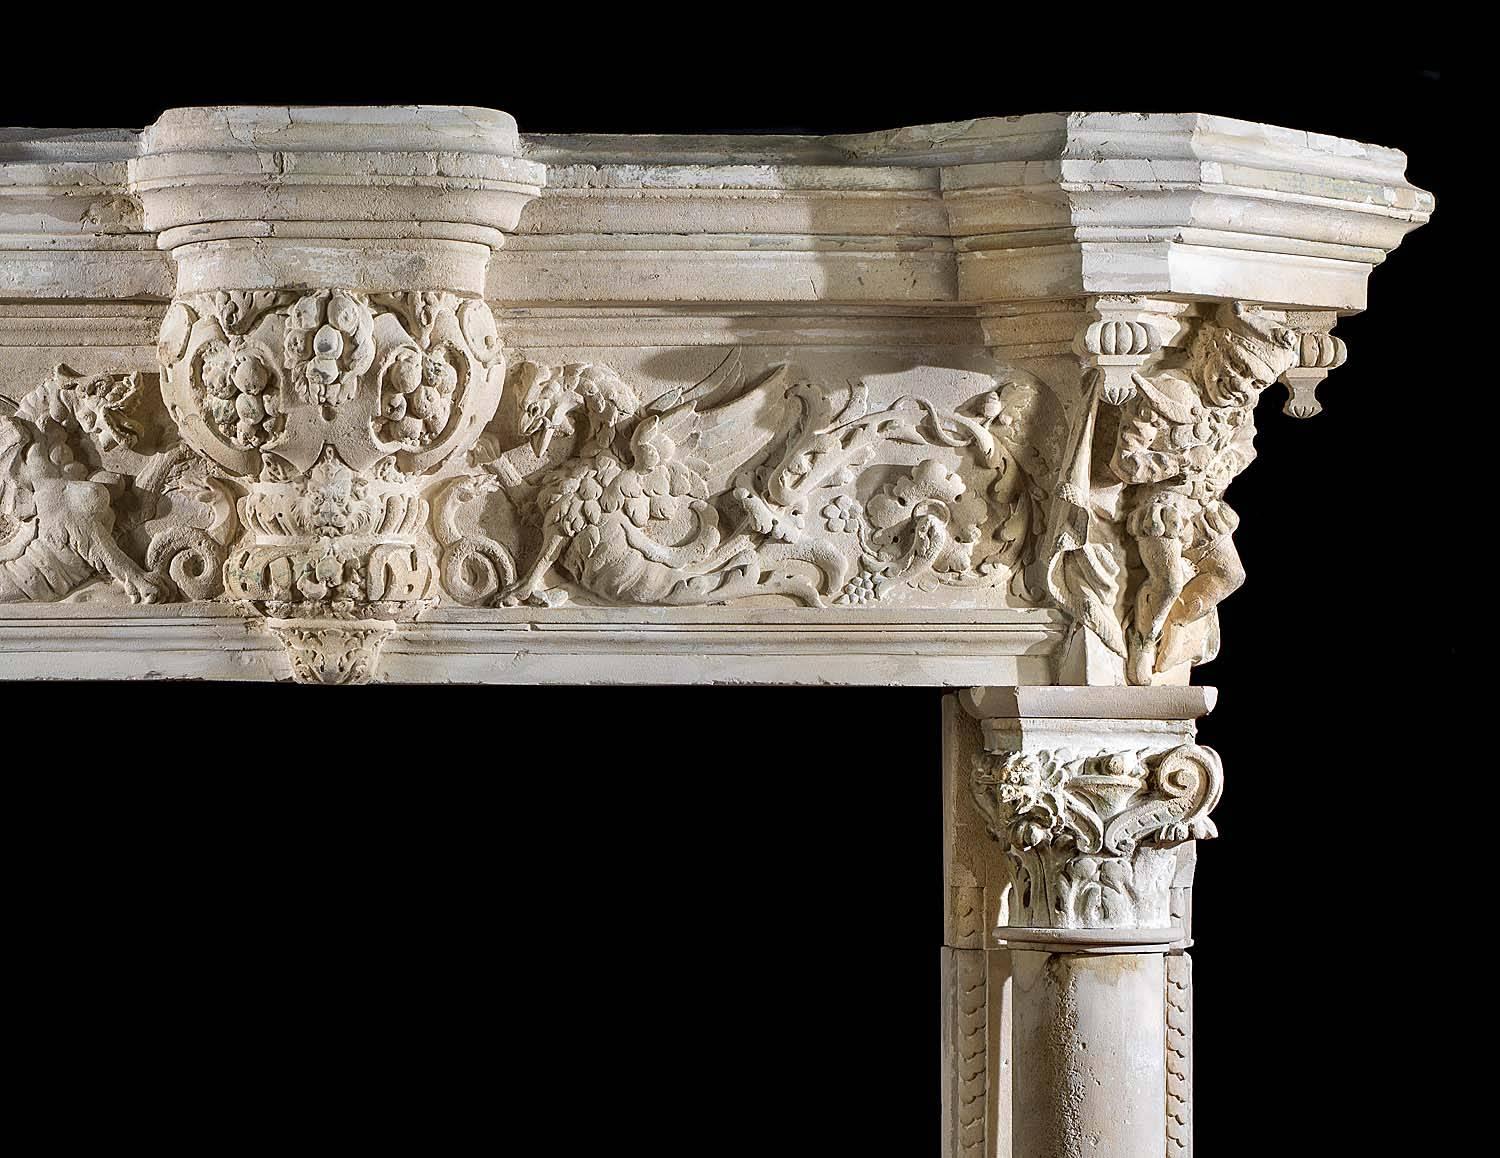 A monumental French Renaissance style antique chimneypiece highly carved in creamy Caen Stone. The massive entablature, with its breakfront shelf centred by a podium above cherubs and grotesque masks, has a boldly carved frieze of mythical dragons